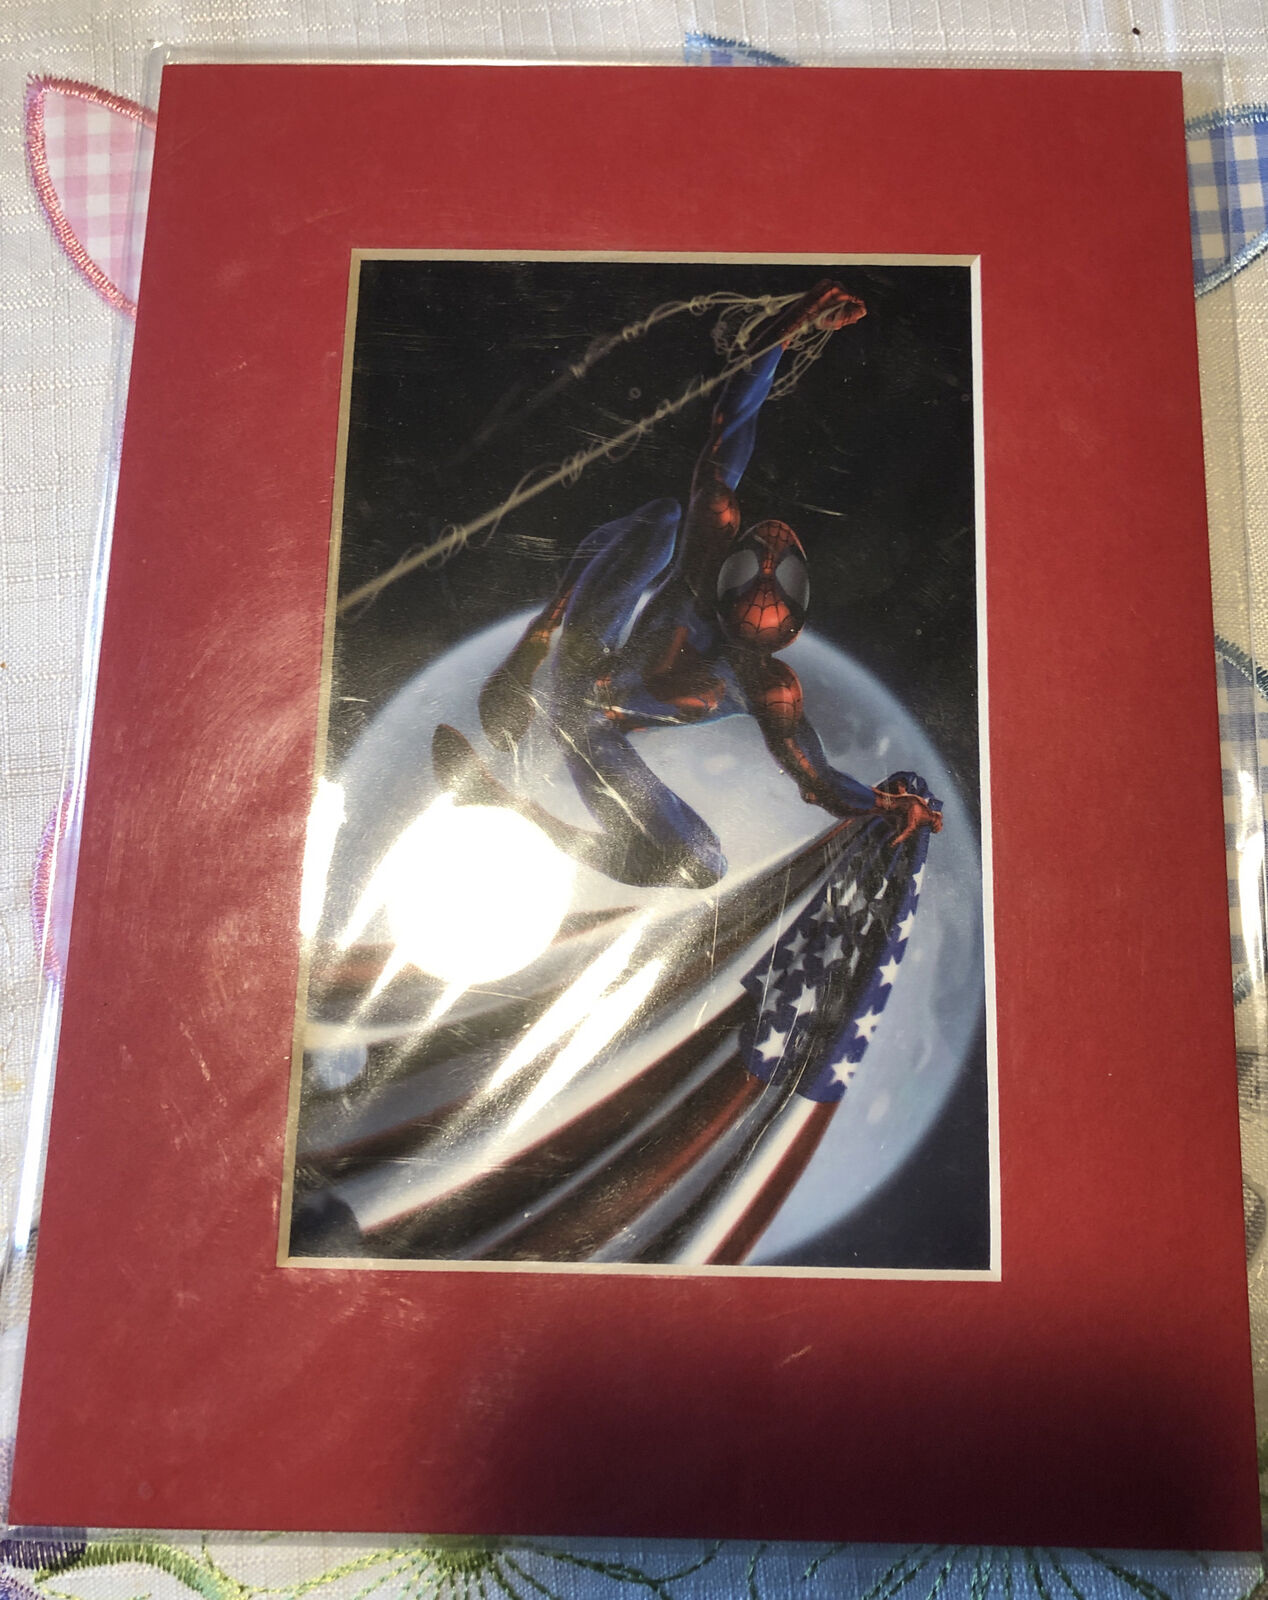 An Official Marvel Limited Edition Laser Cel